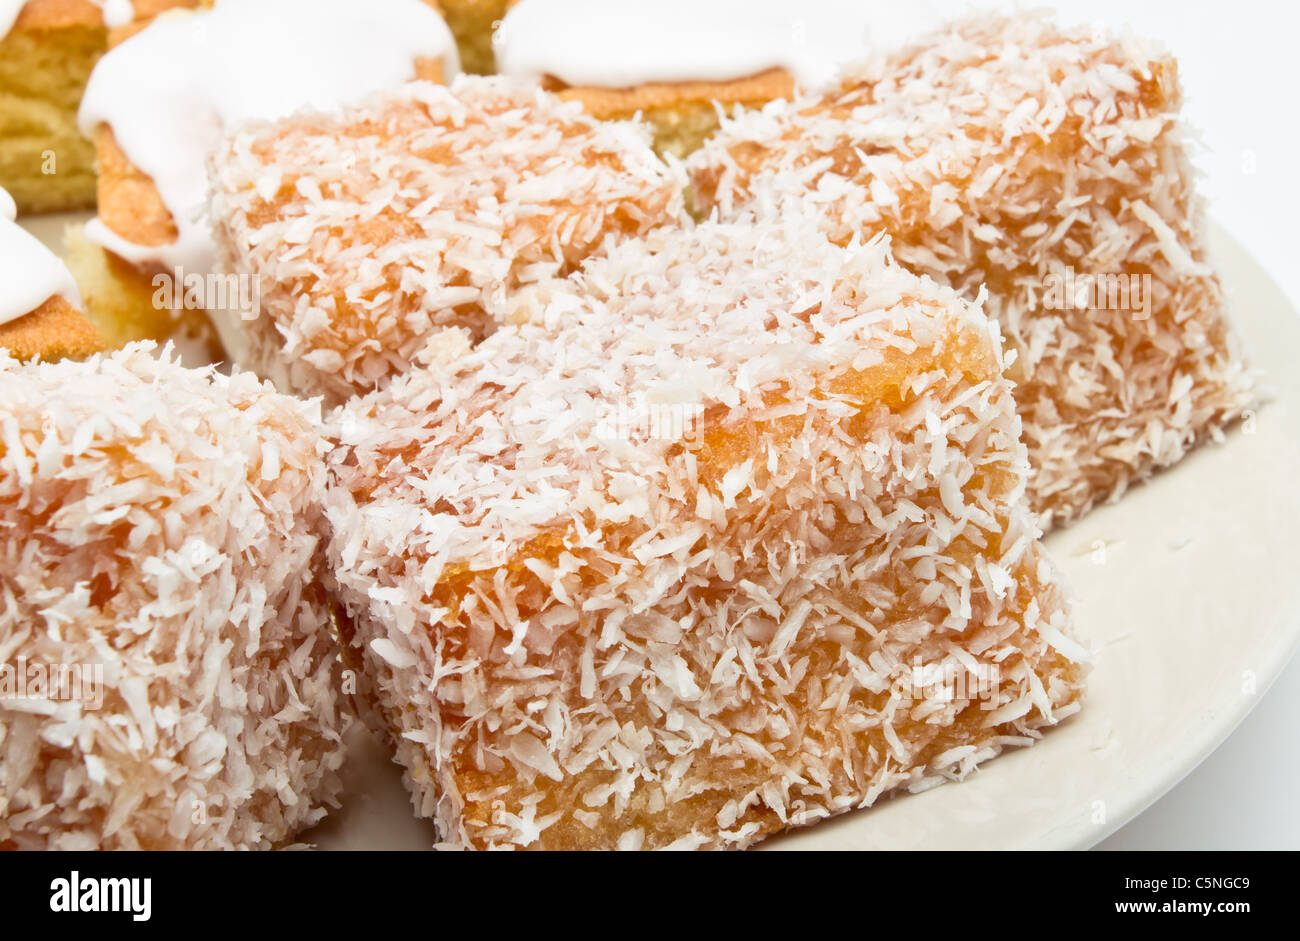 Traditional Madeleines coated in jam and covered with coconut sprinkles. Stock Photo